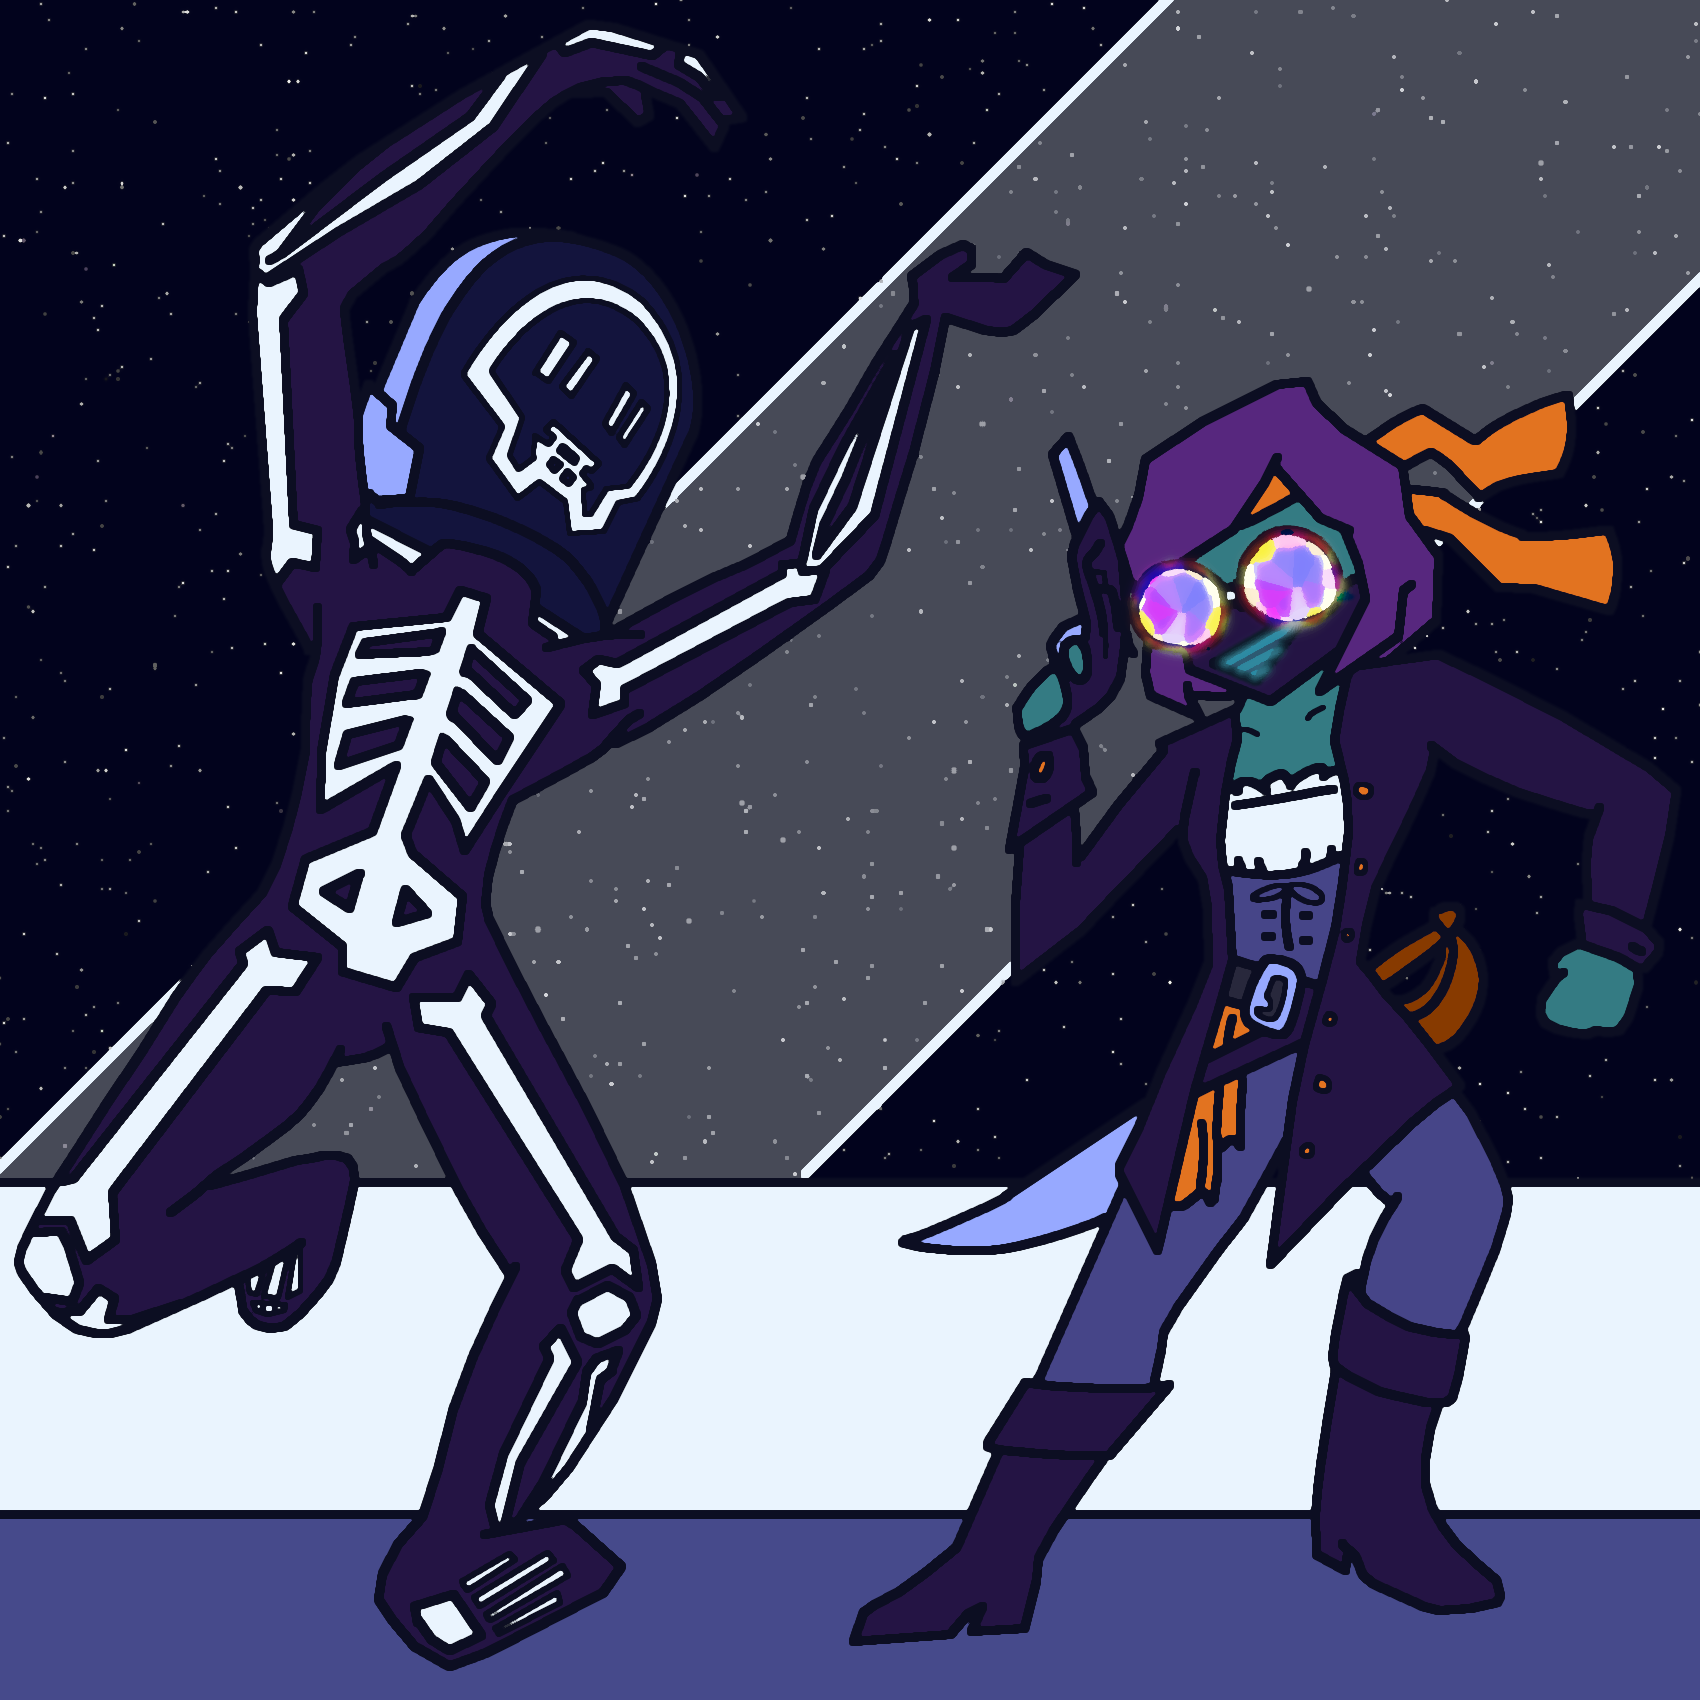 Sonny dresses as a skeleton version of ᕲเムเՇคɭ 丂ӄนʅʅ and Rezo dresses as a pirate for halloween.